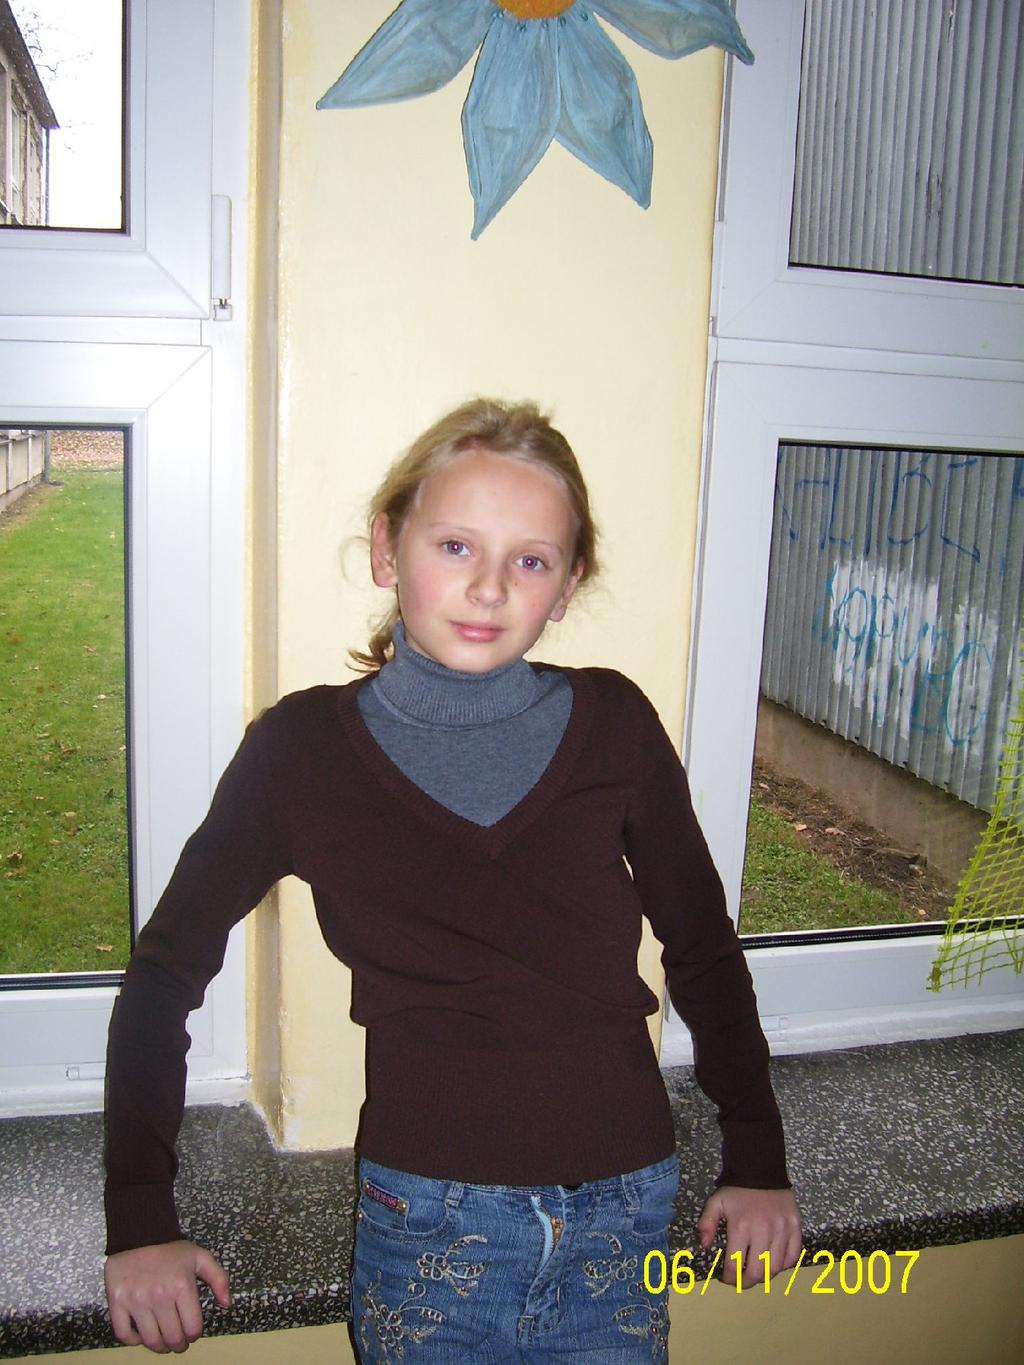 Hi! My name is Gosia. I m Polish. I m 11. I ve got one brother, he is 4. I love listening to music. My favorite singers are Rihanna and Fergie. I ve got their CDs.